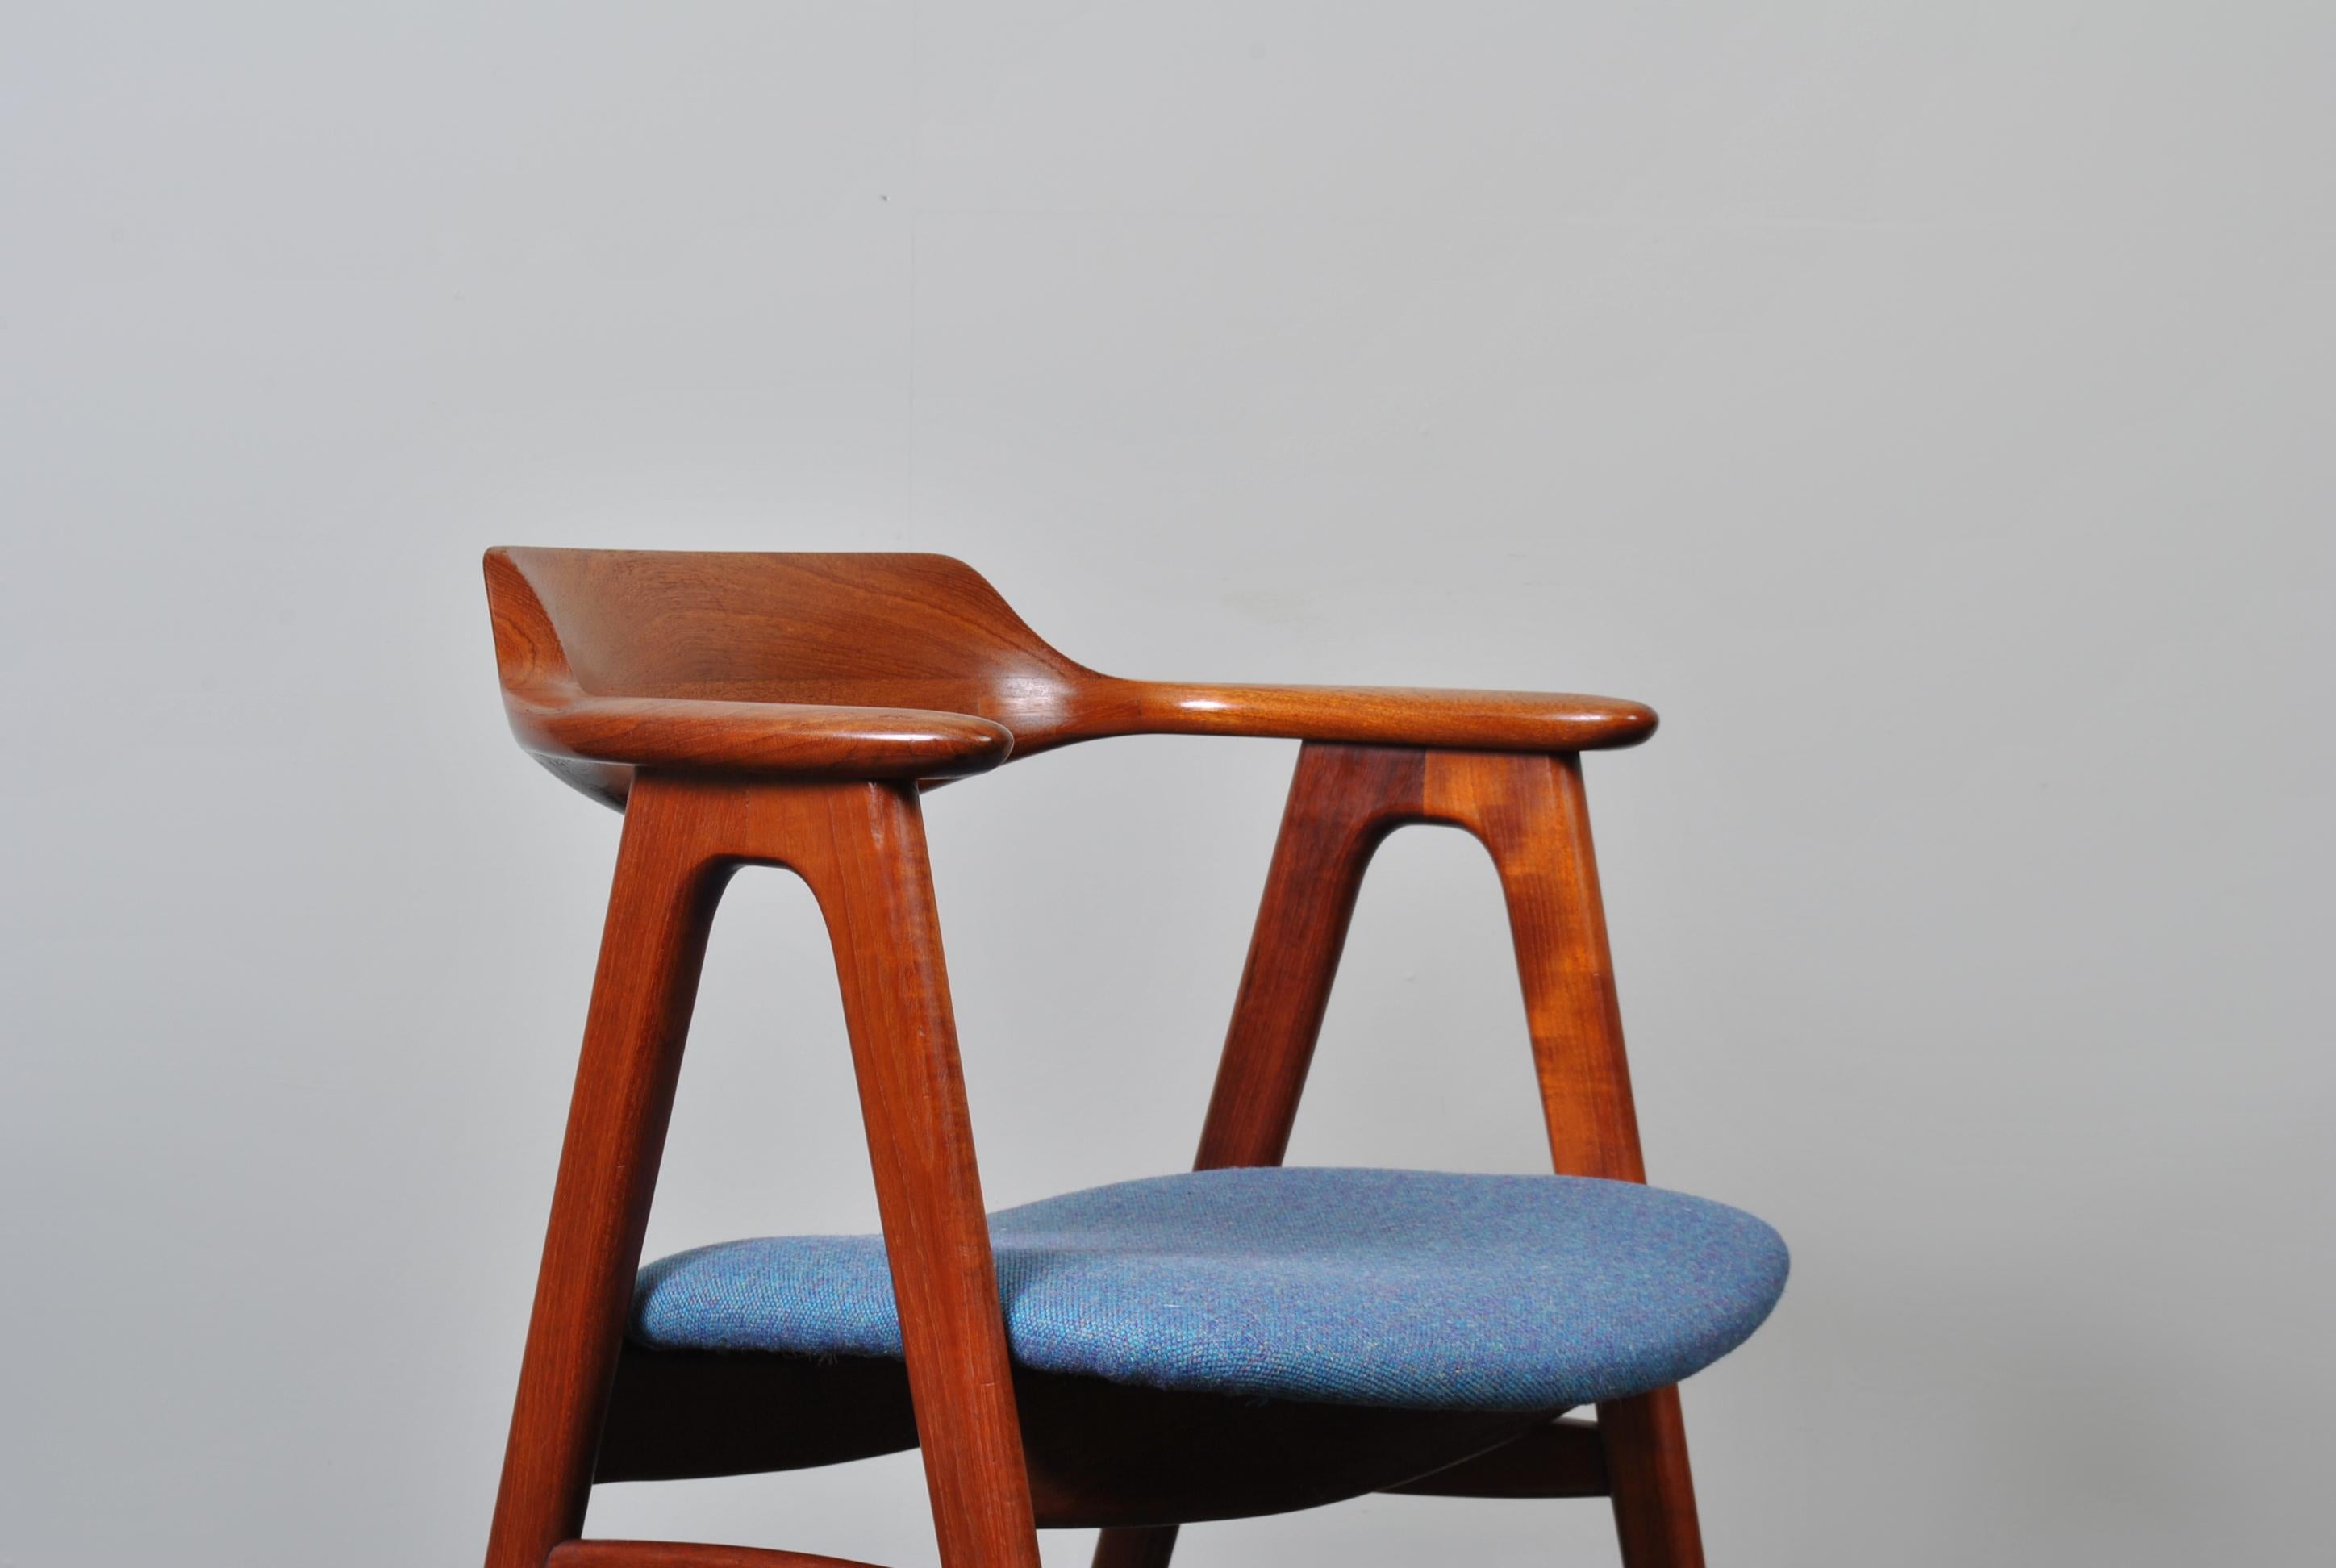 A wonderful chair design by Erik Kirkegaard, Denmark circa 1950. High quality construction techniques in solid teak. Reupholstered. Thoroughly cleaned and polished.
Custom Reupholstery is available.